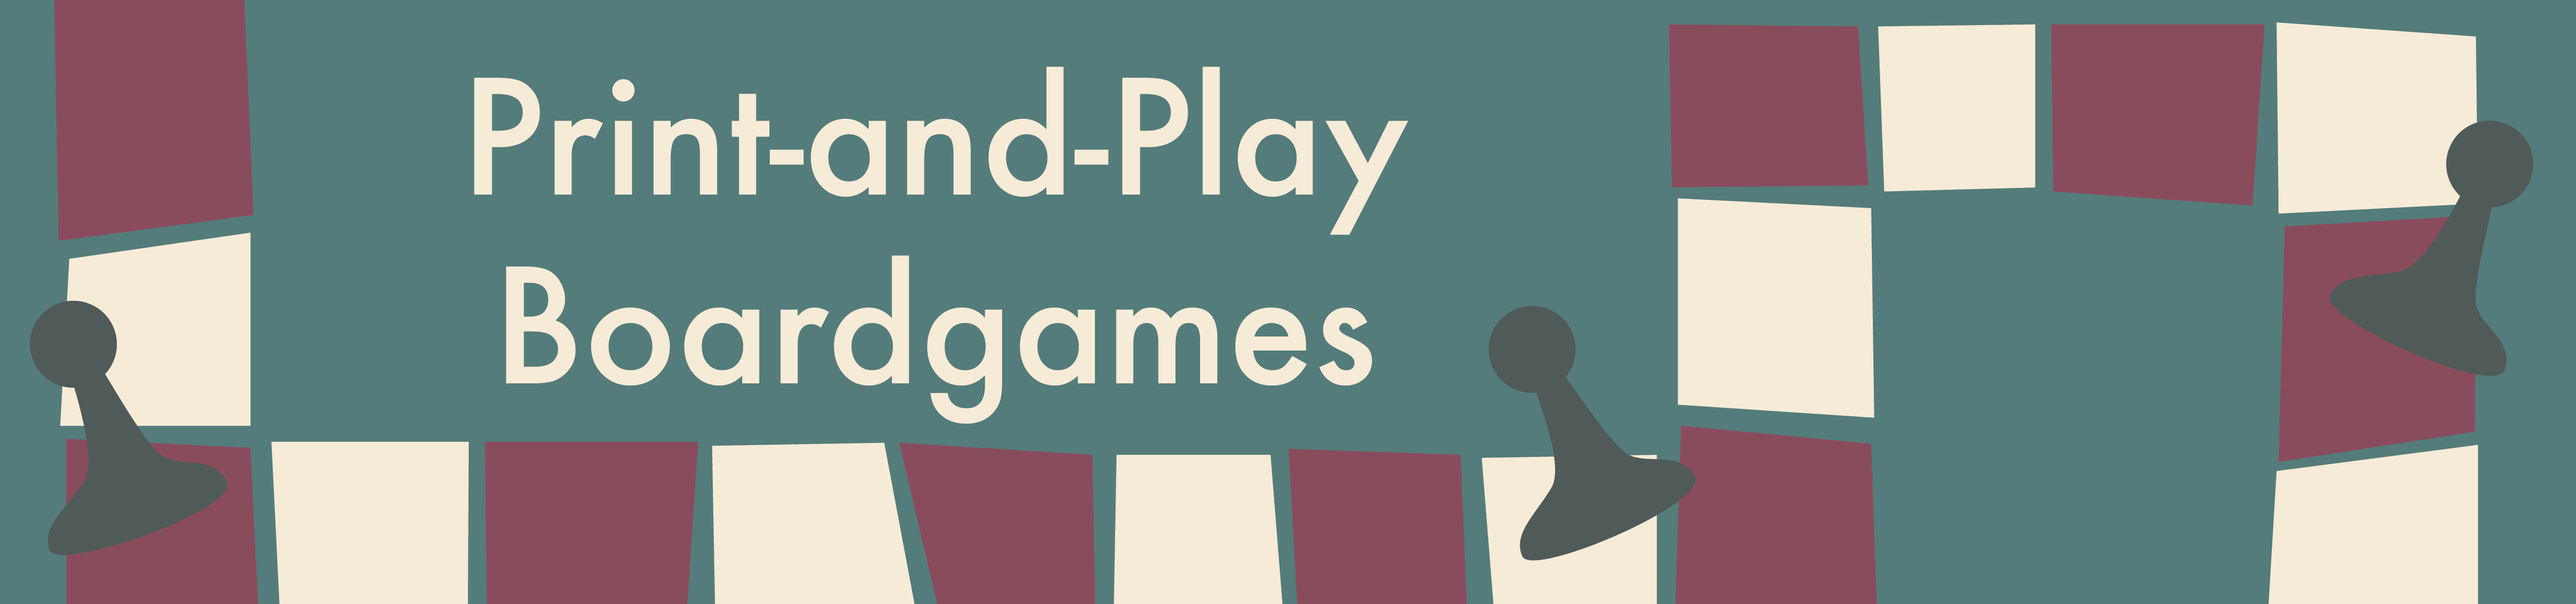 Print-and-Play Boardgames header